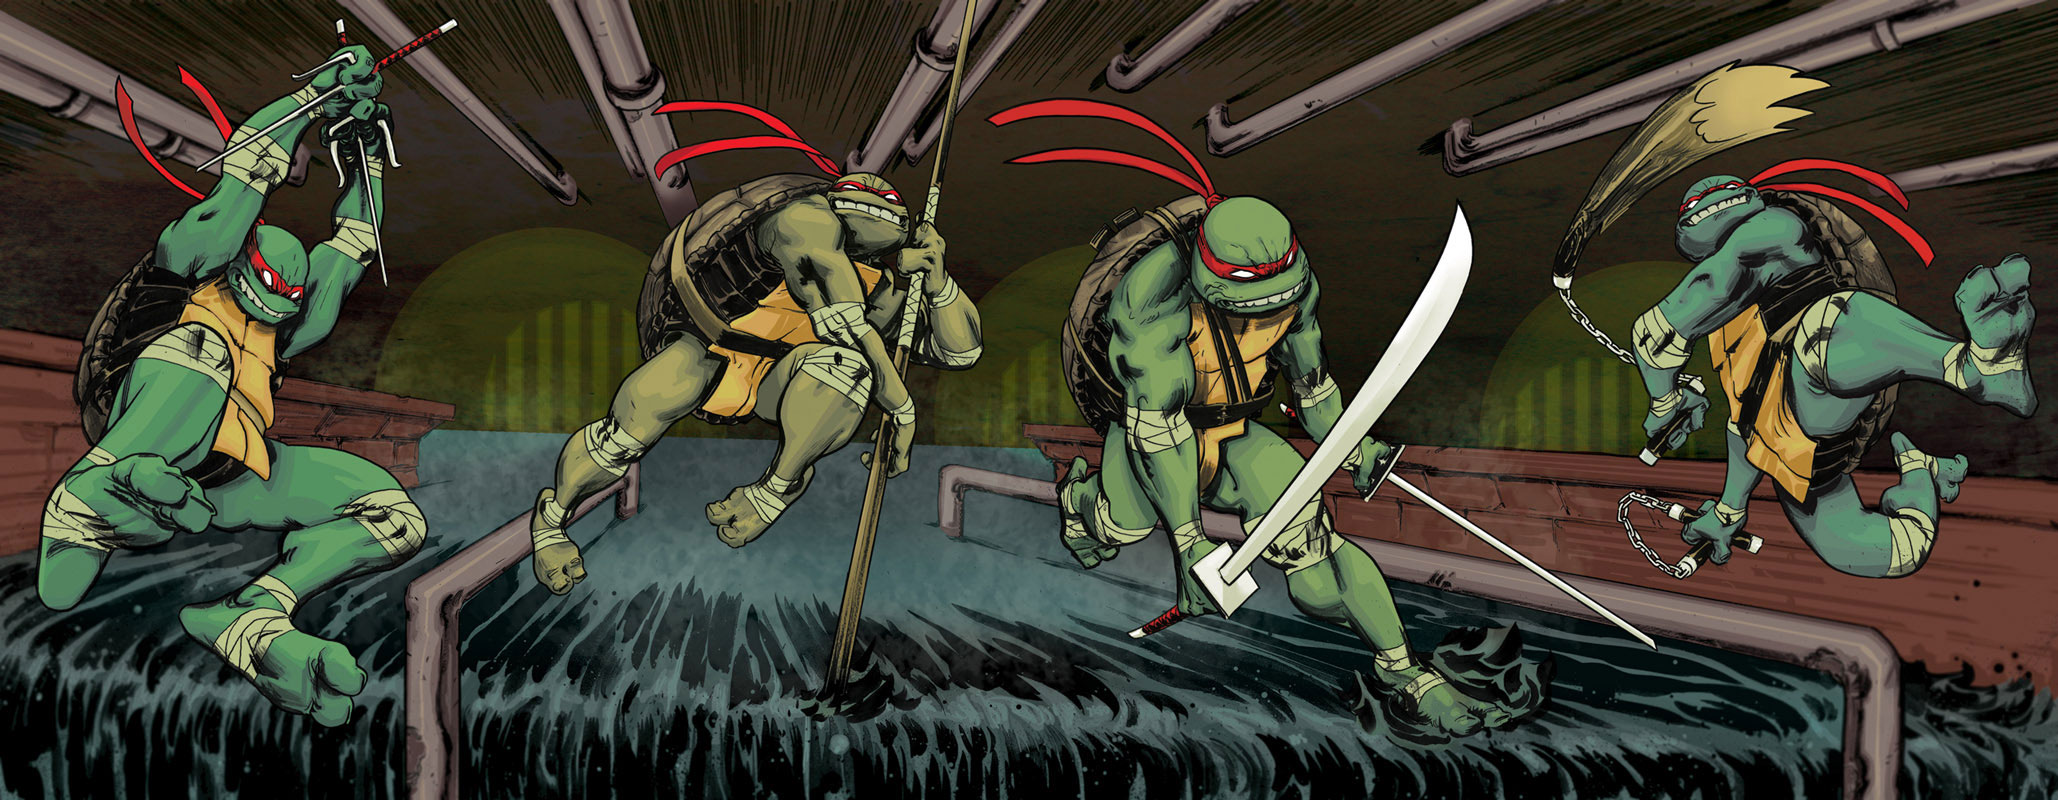 http://images2.wikia.nocookie.net/__cb20110520014220/tmnt/images/e/e7/Tmnt-coverspread.jpg